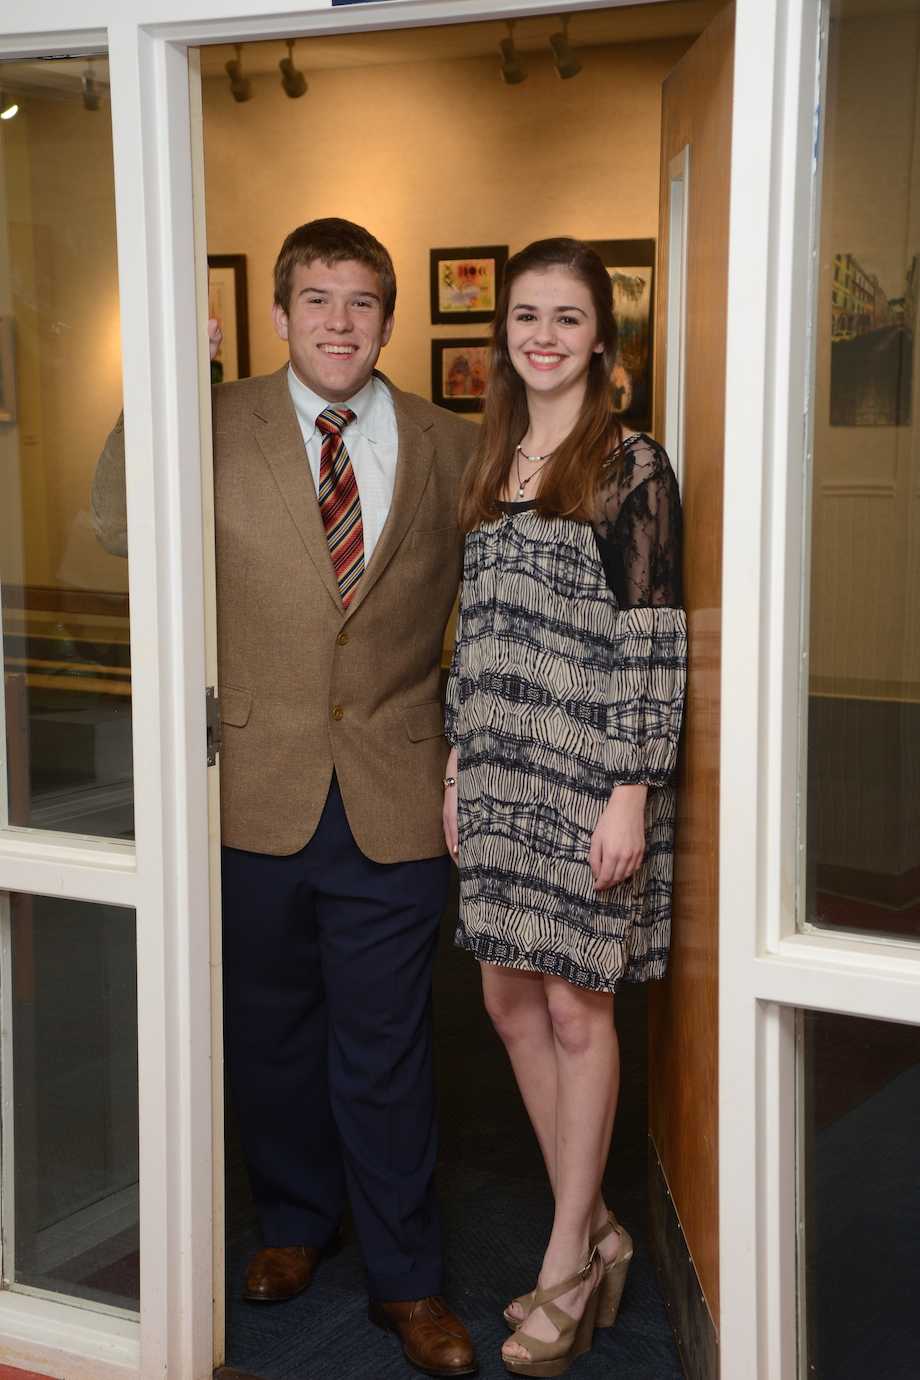 Mr. and Miss Junior Class: J.C. Pride and Martha Rayner  (photo courtesy of Mr. Hubert Worley)